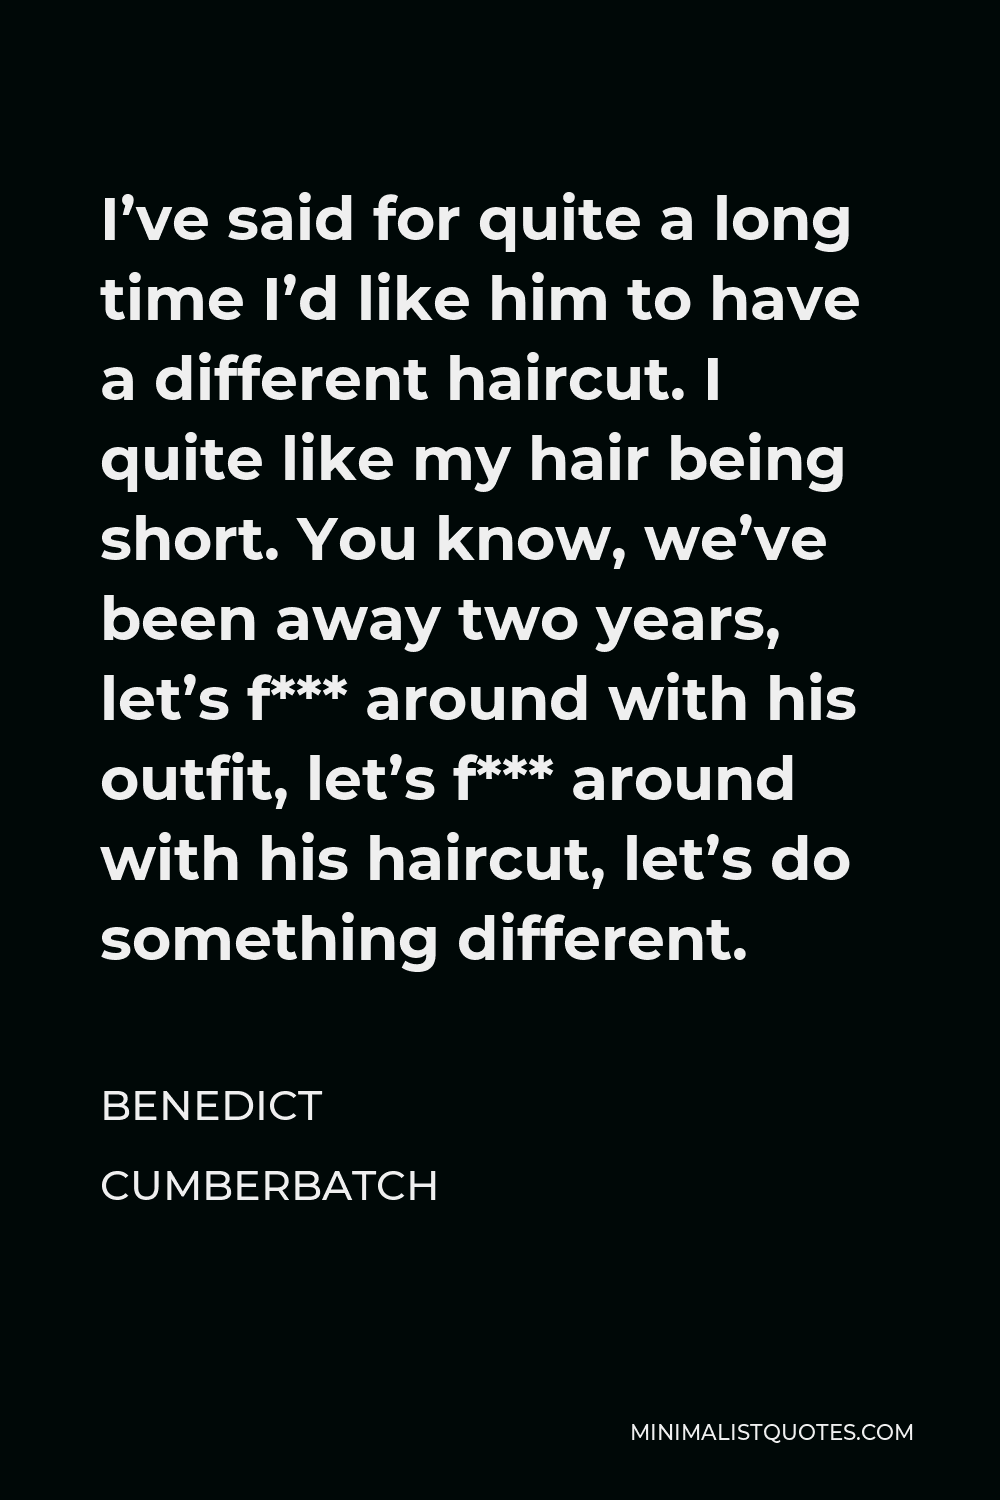 Benedict Cumberbatch Quote - I’ve said for quite a long time I’d like him to have a different haircut. I quite like my hair being short. You know, we’ve been away two years, let’s f*** around with his outfit, let’s f*** around with his haircut, let’s do something different.